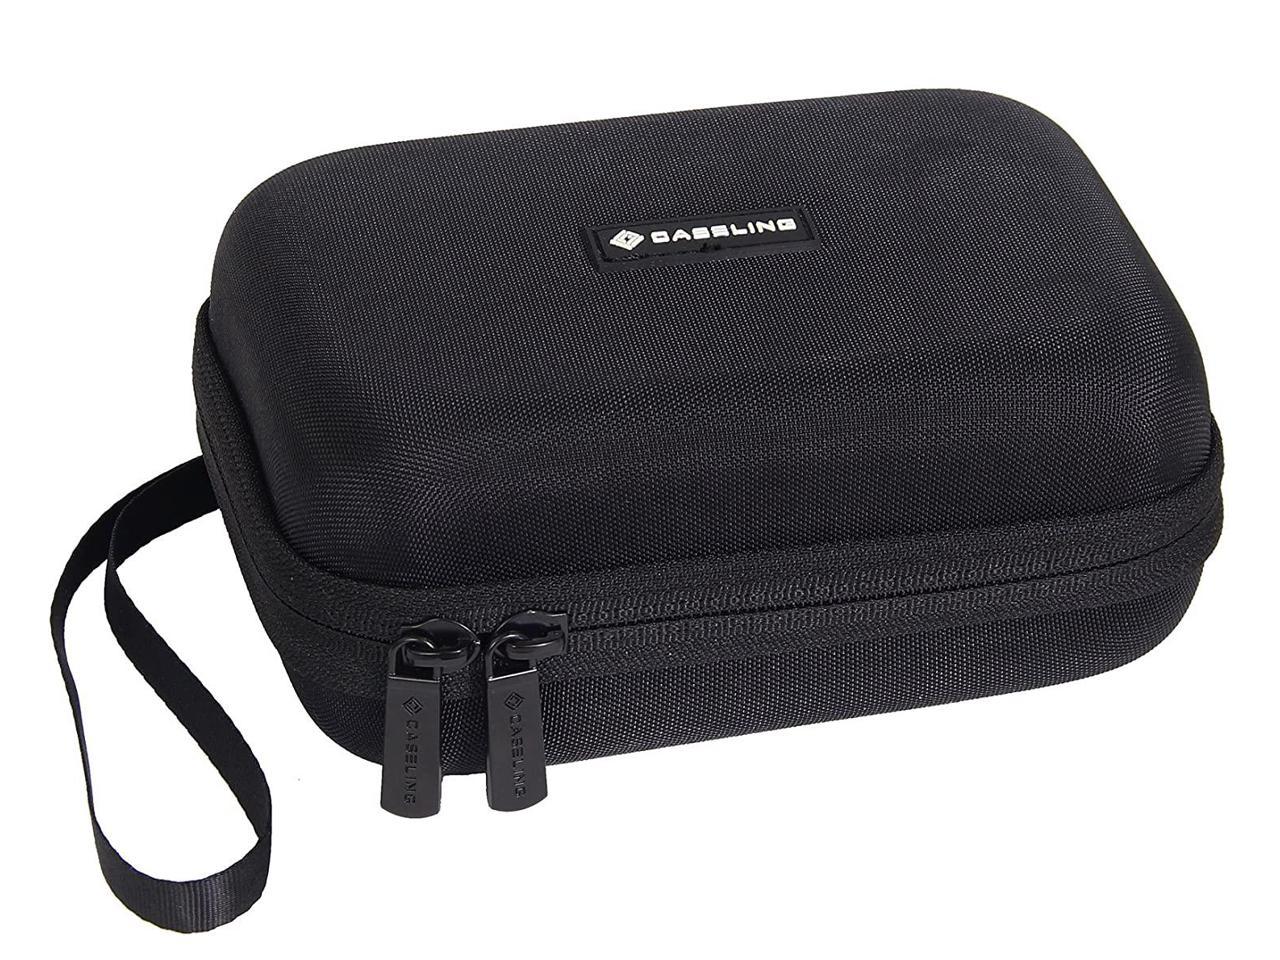 Caseling Hard Carrying GPS Case for up to 5-inch Screens. for Garmin ...